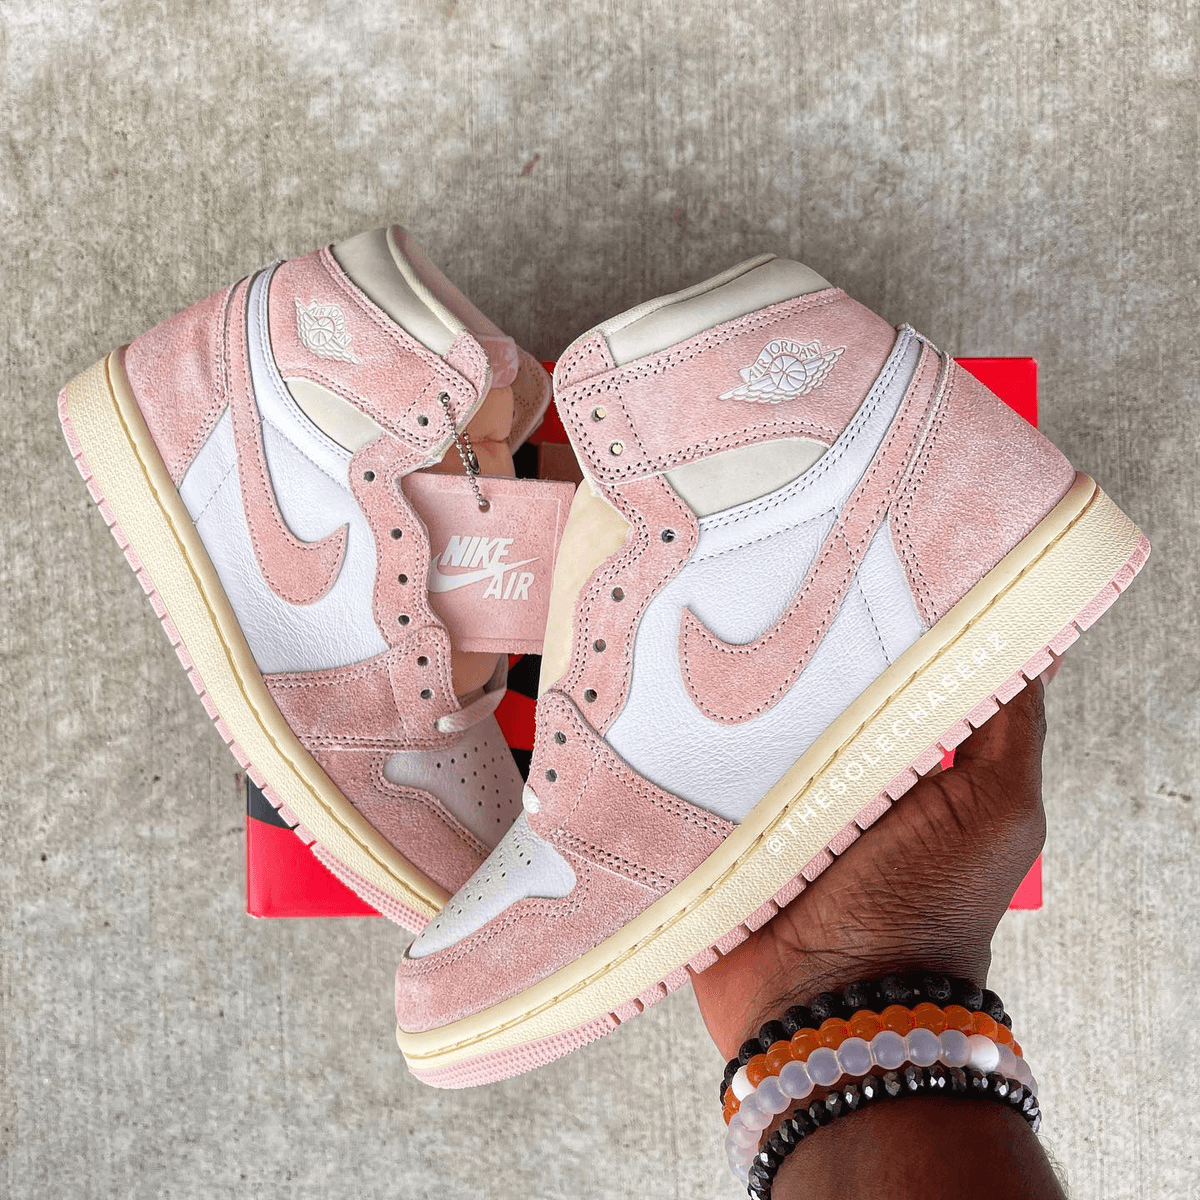 The Air Jordan 1 High OG Is Coming in Washed Pink